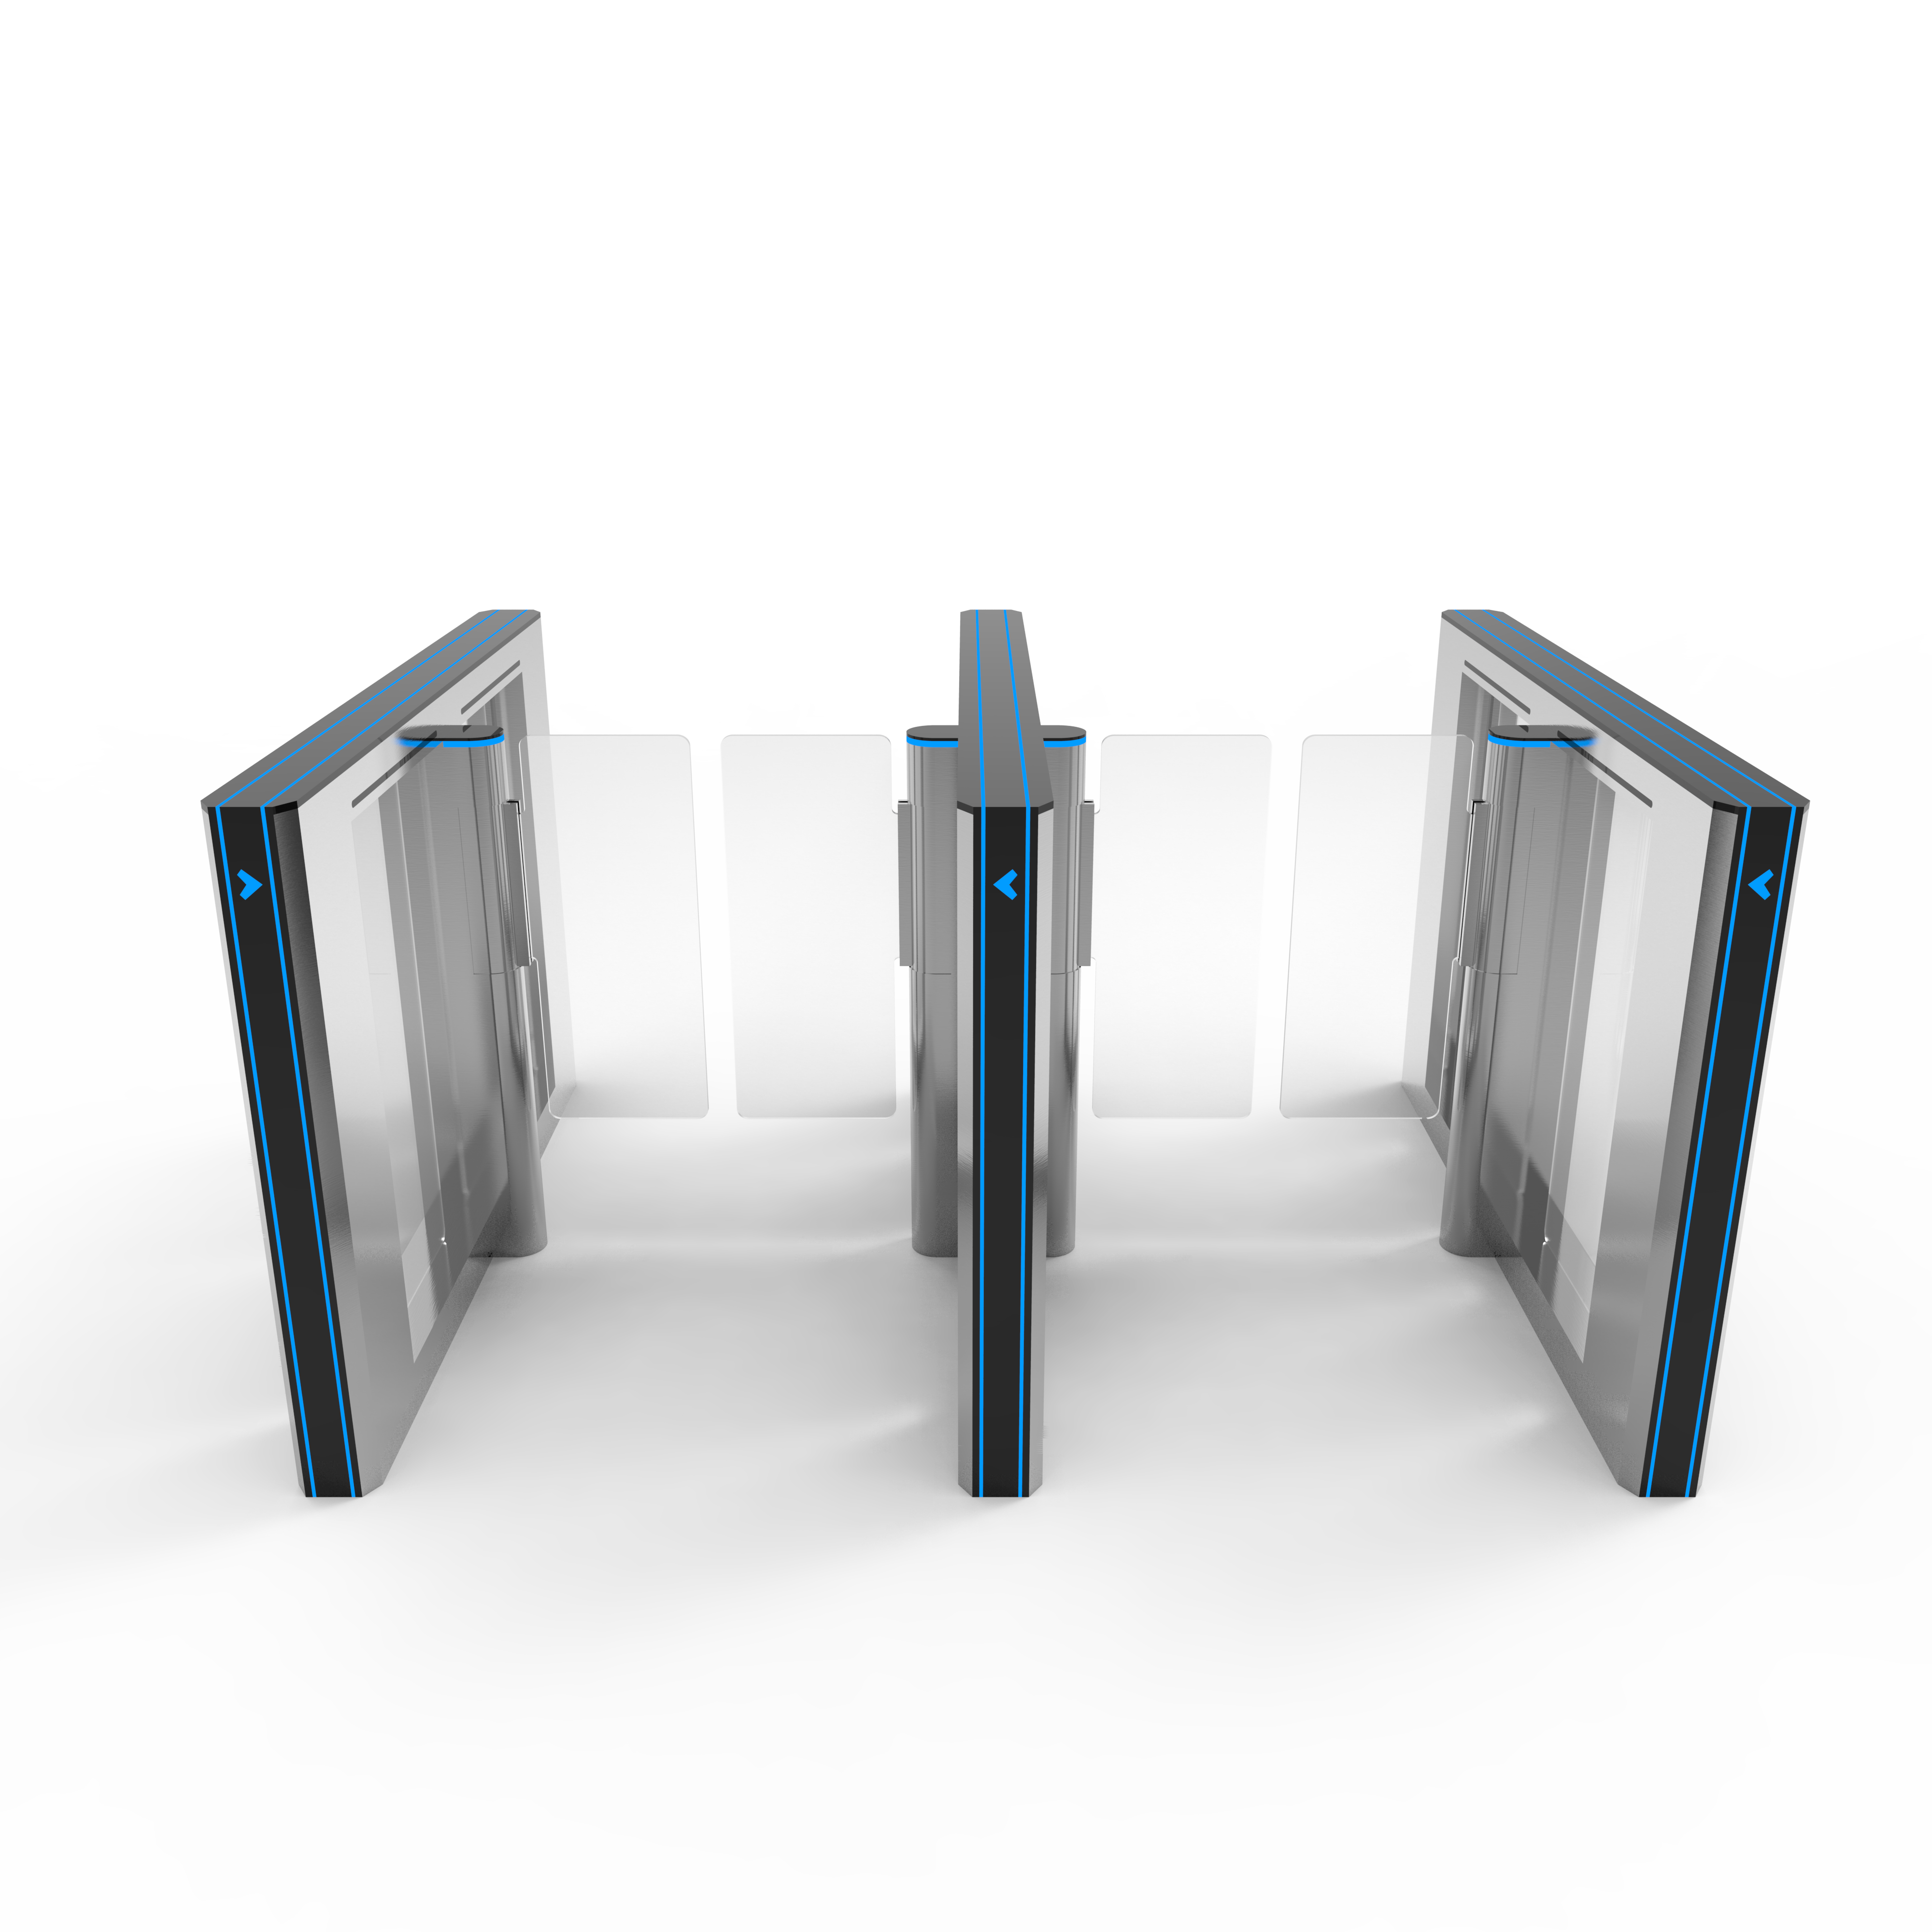 7 Reasons Speedgate Turnstiles are Right For You